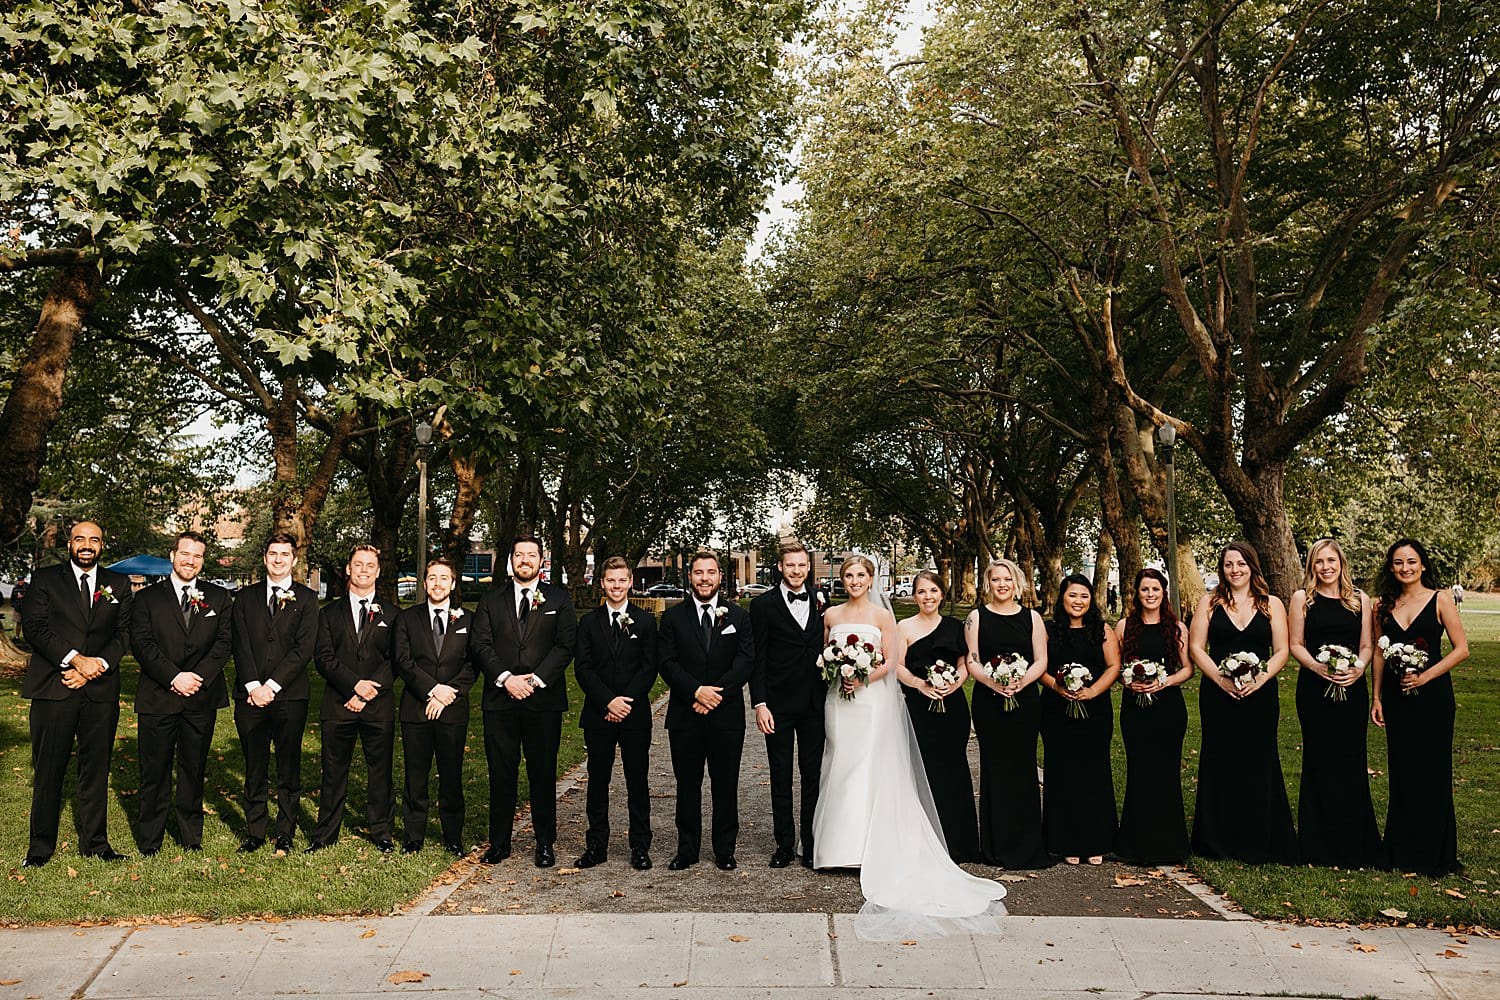 portrait of the bridal party at Green Lake bridesmaids in black and groomsmen in black 415 Westlake Wedding by Seattle Wedding Photographer Marcela Pulido